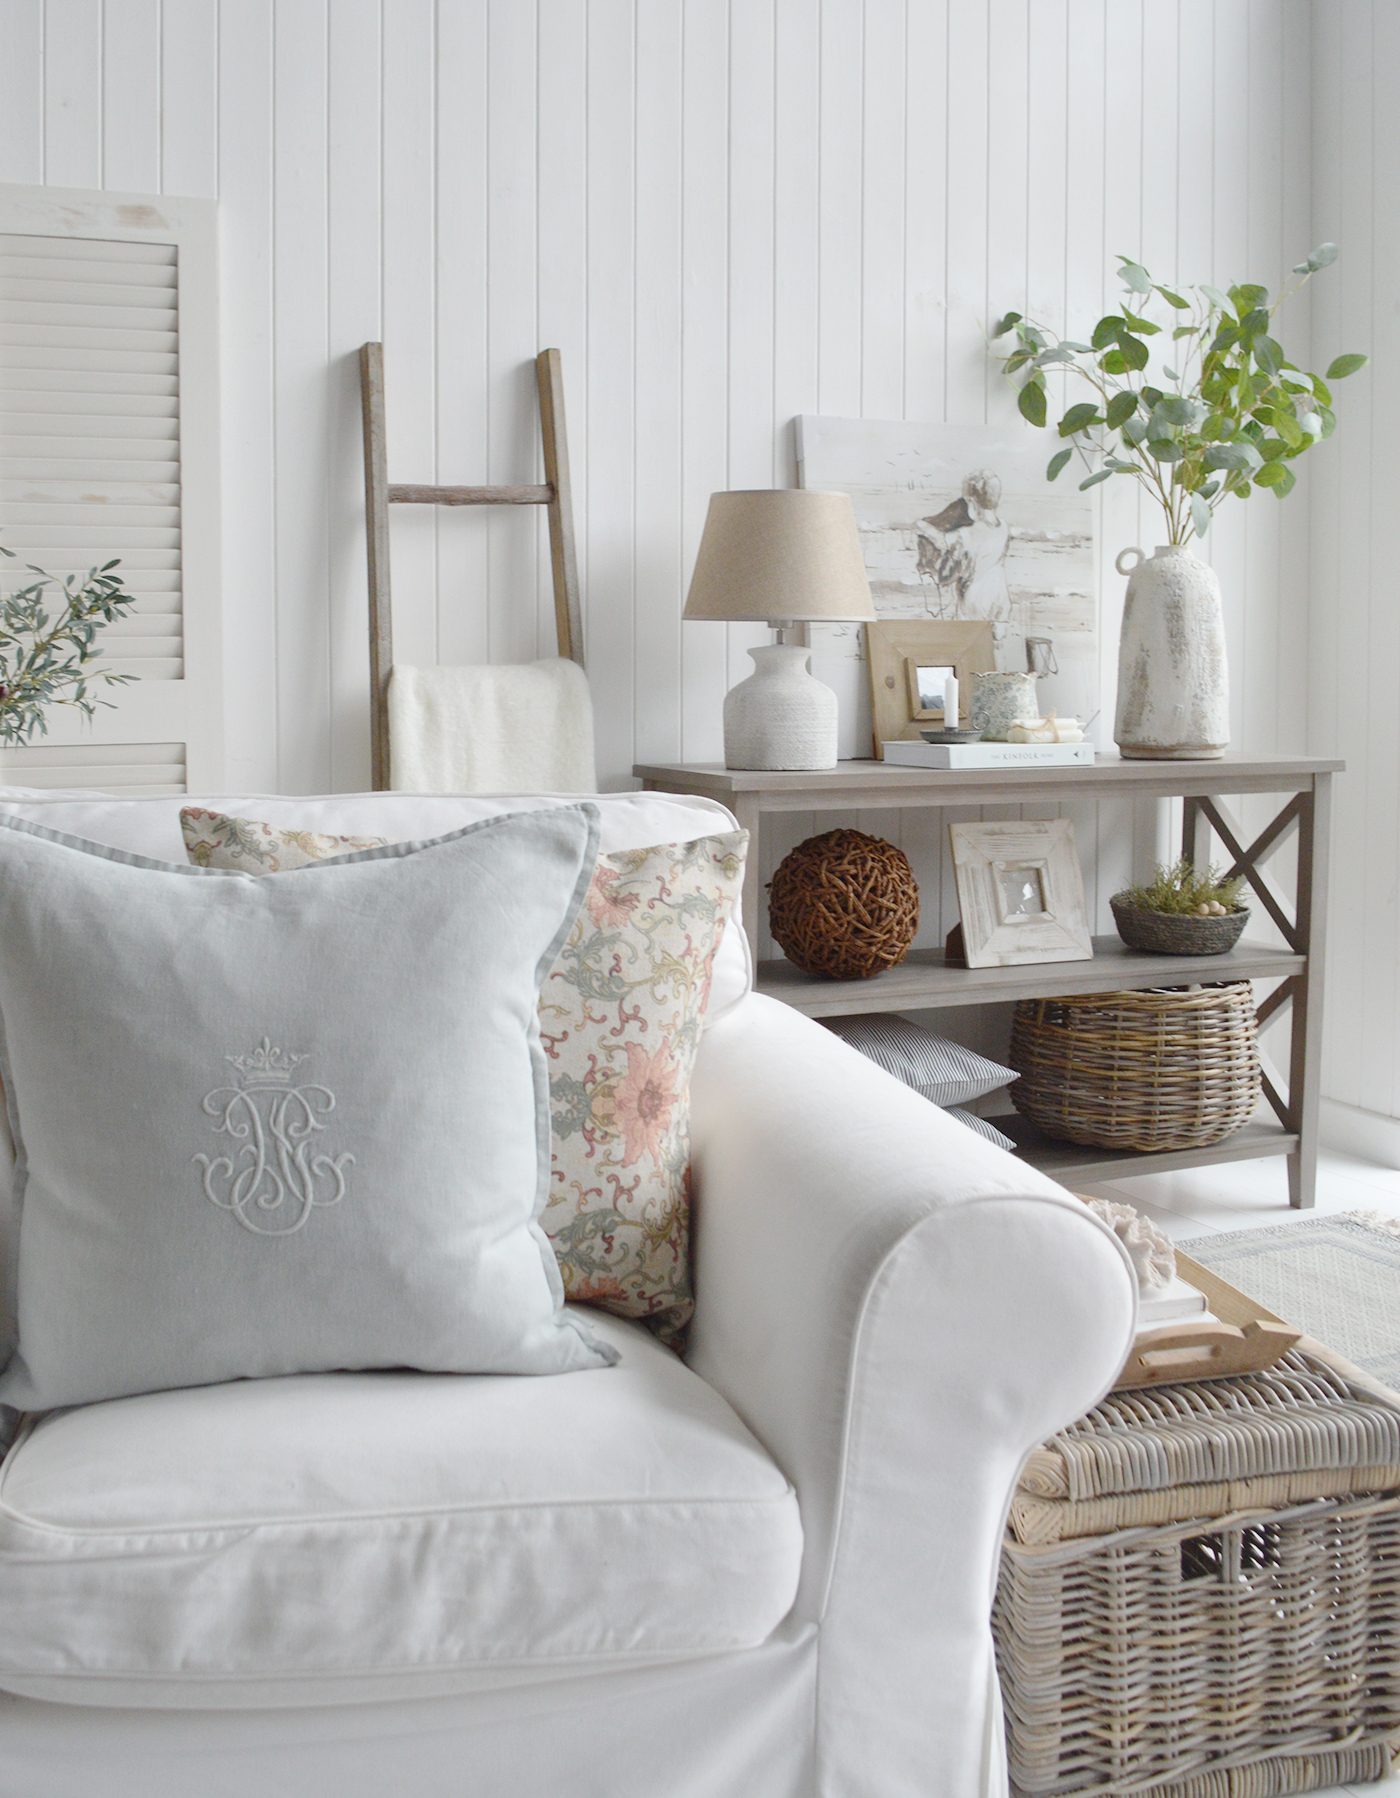 Layering pieces of furniture create a room full of interest for a relaxed modern farmhouse feel